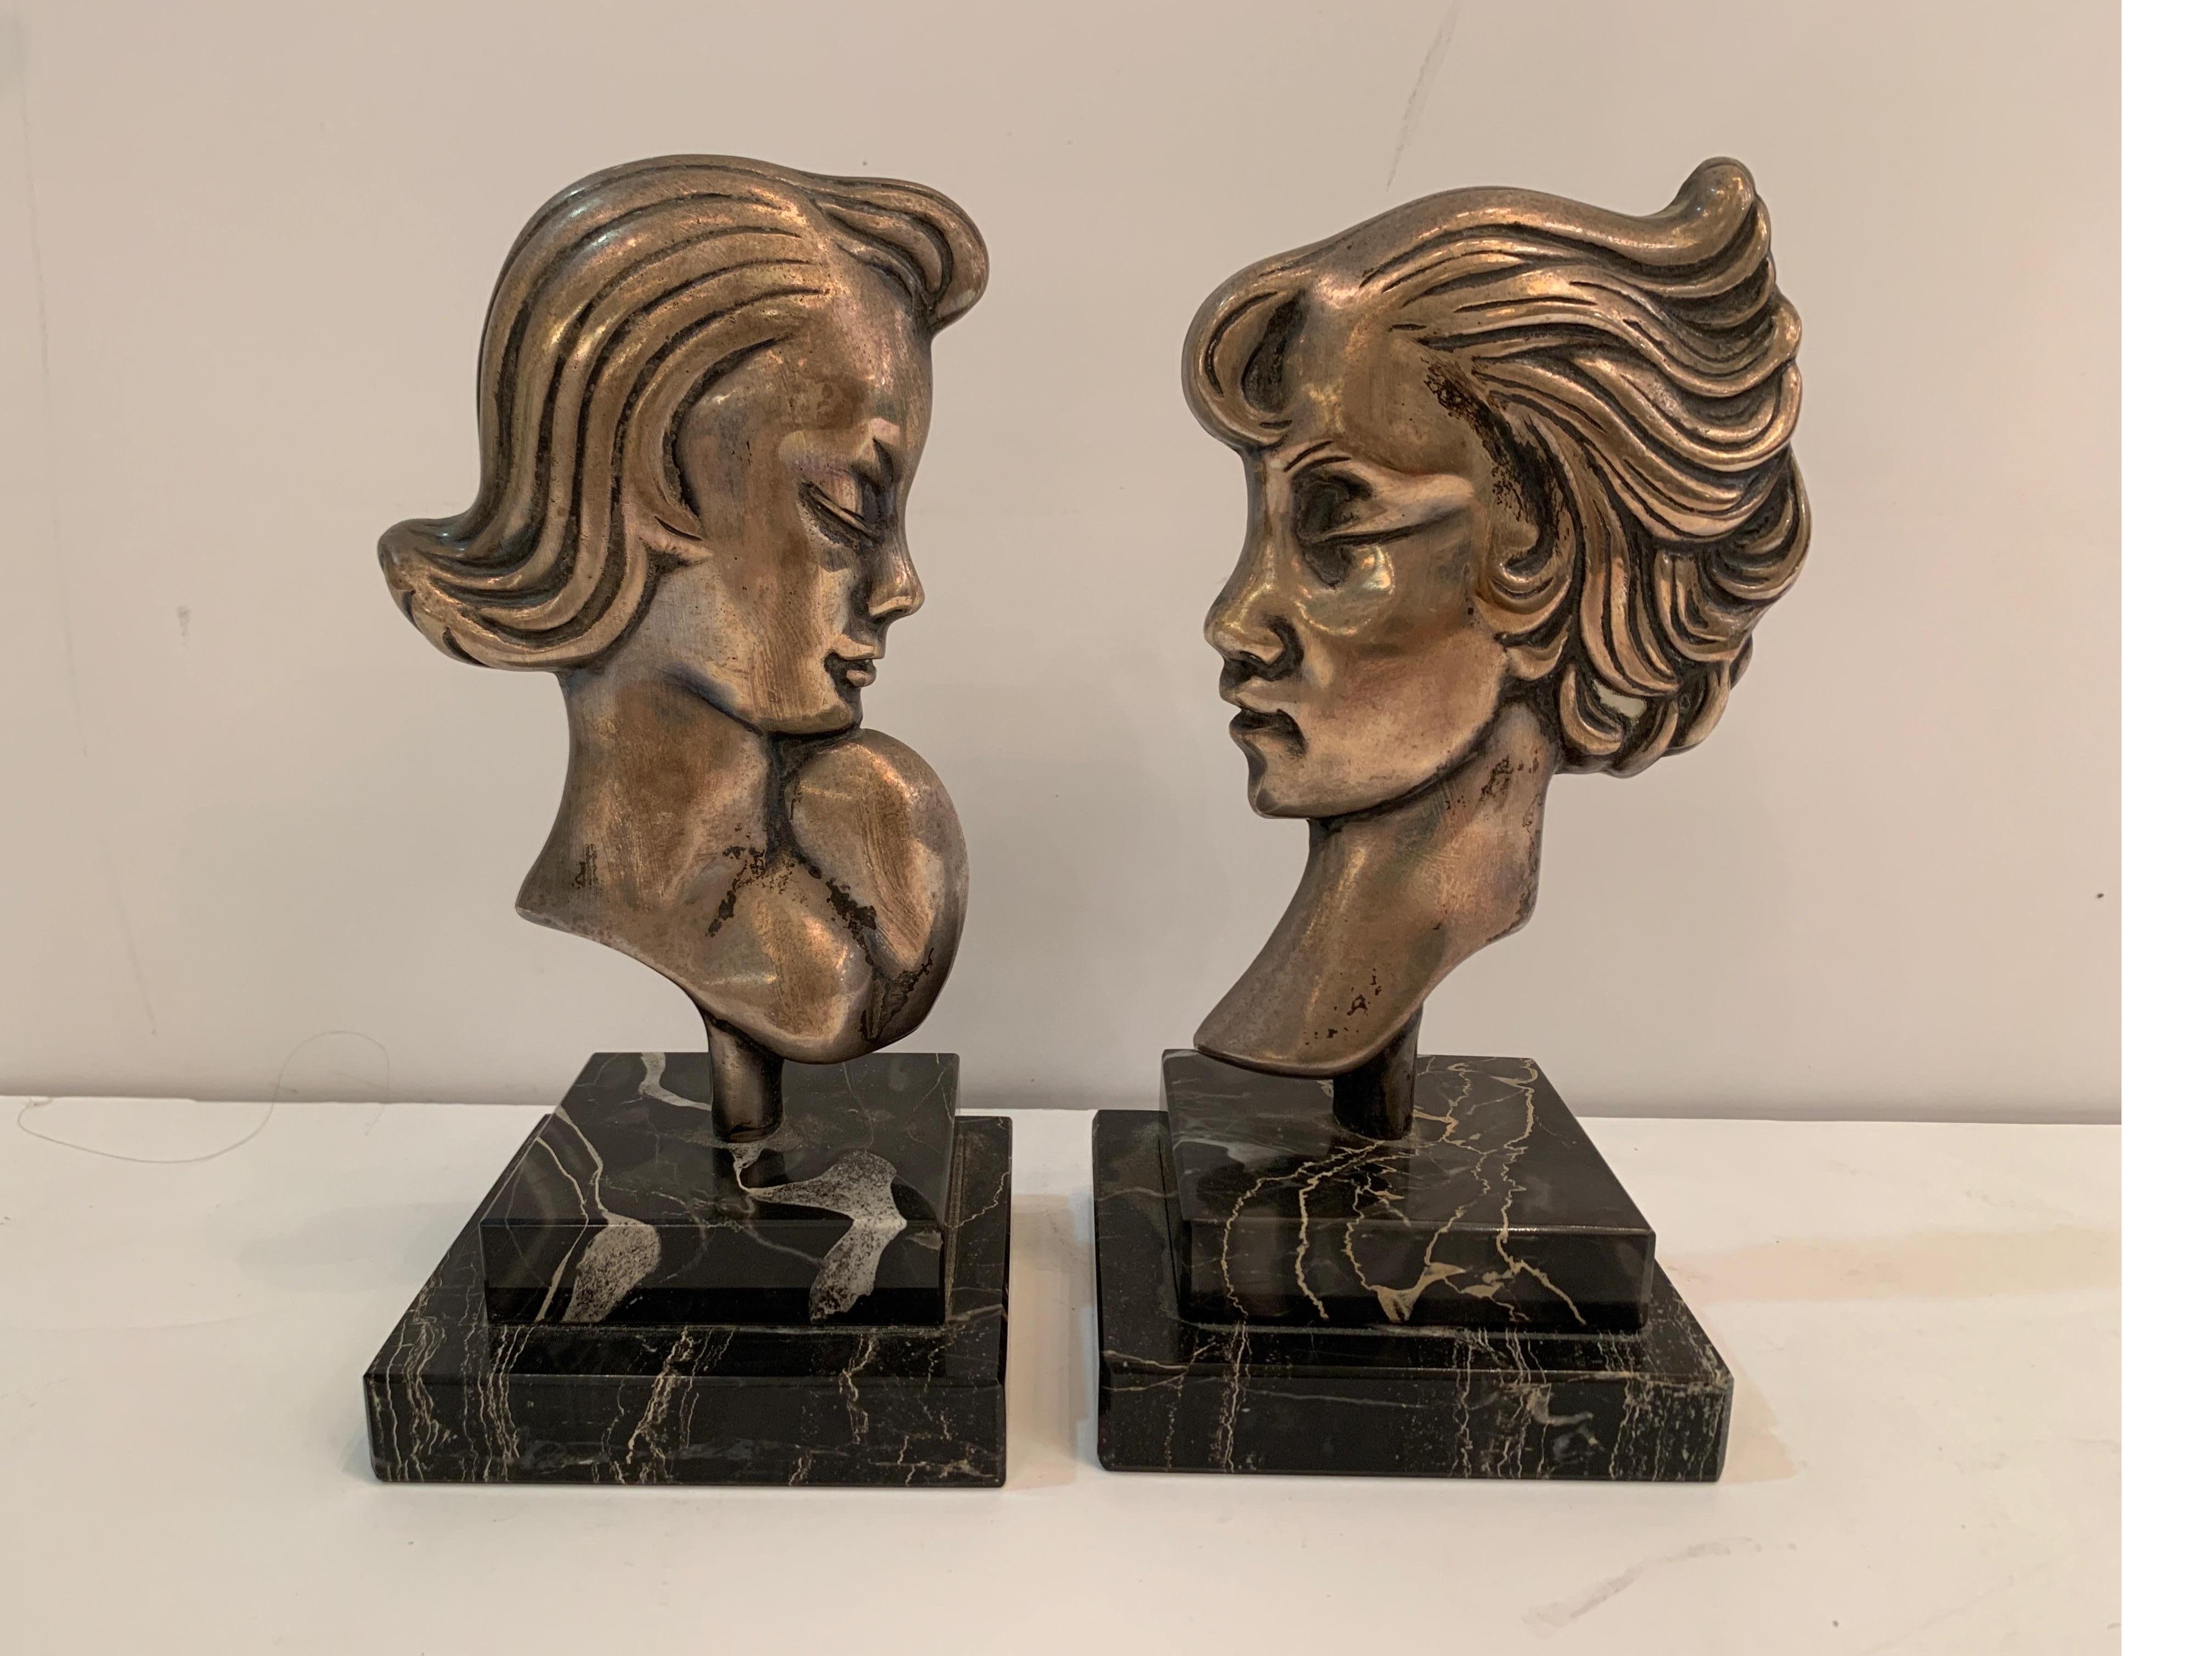 Pair of 1930 midcentury silvered bronze French deco head statuettes on marble bases, nice original patination
Dimensions: 4